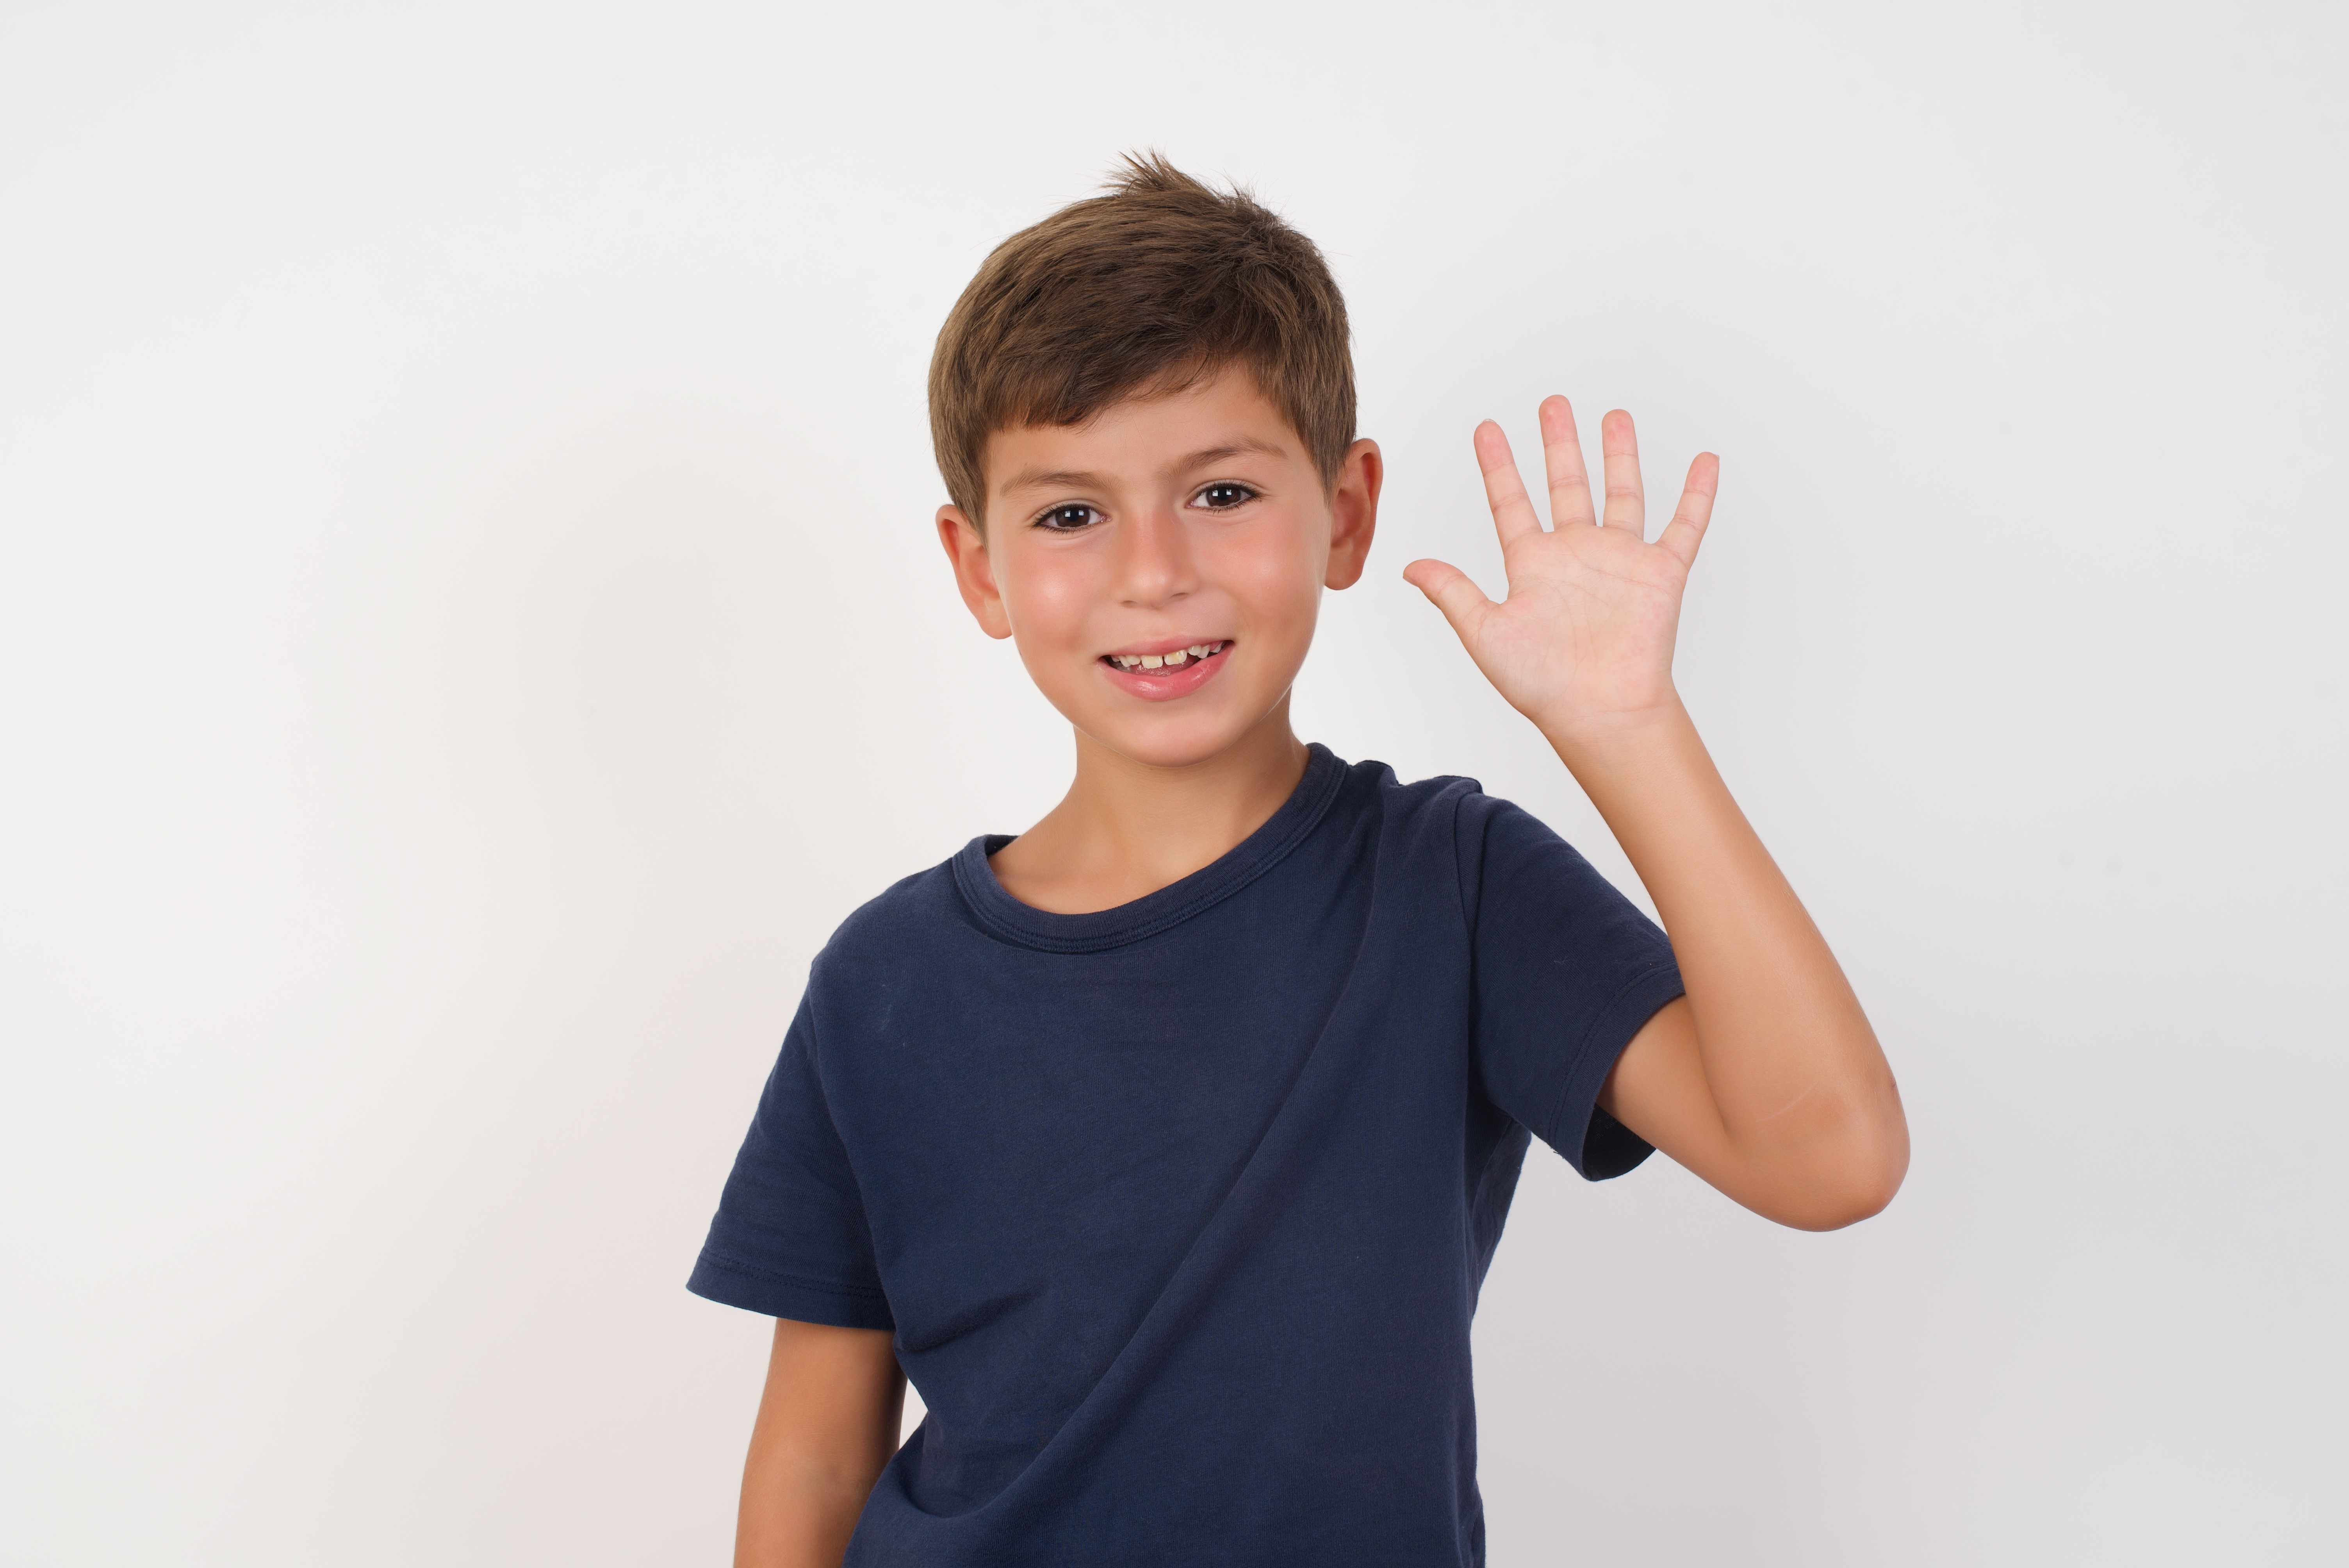 The boy waved hello and shook the woman's hand. | Source: Shutterstock